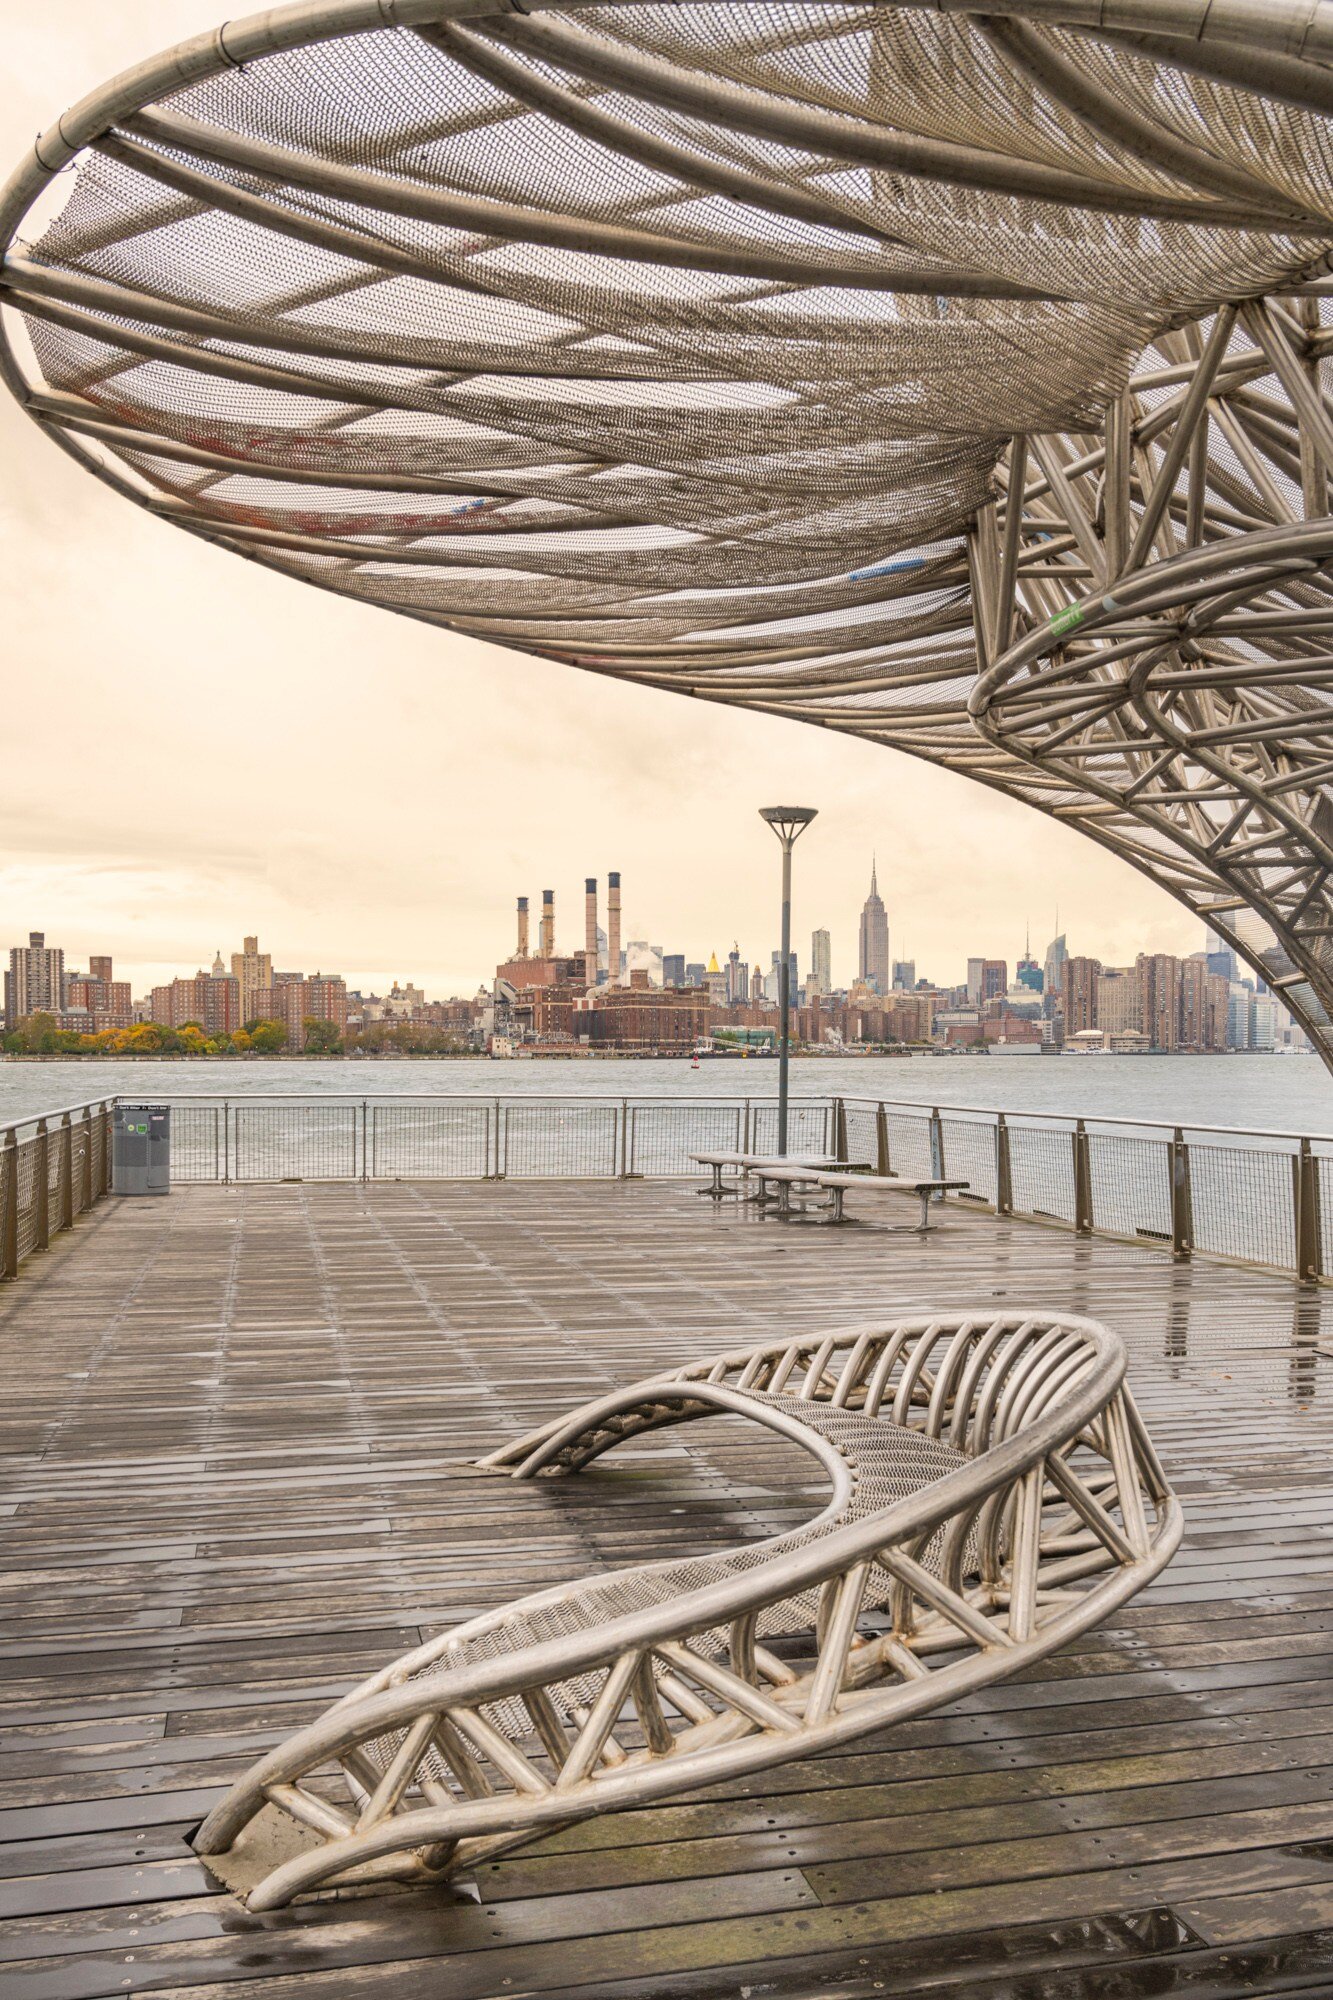 Trying to make grey October days in New York interesting. This sculpture seat will do. ;) Plus... who could get sick of that skyline. 

#williamsburg #manhattanview 
#TourismPhotographer #hotelphotographer #travelphoto #tourism #peopleinplaces
#trave